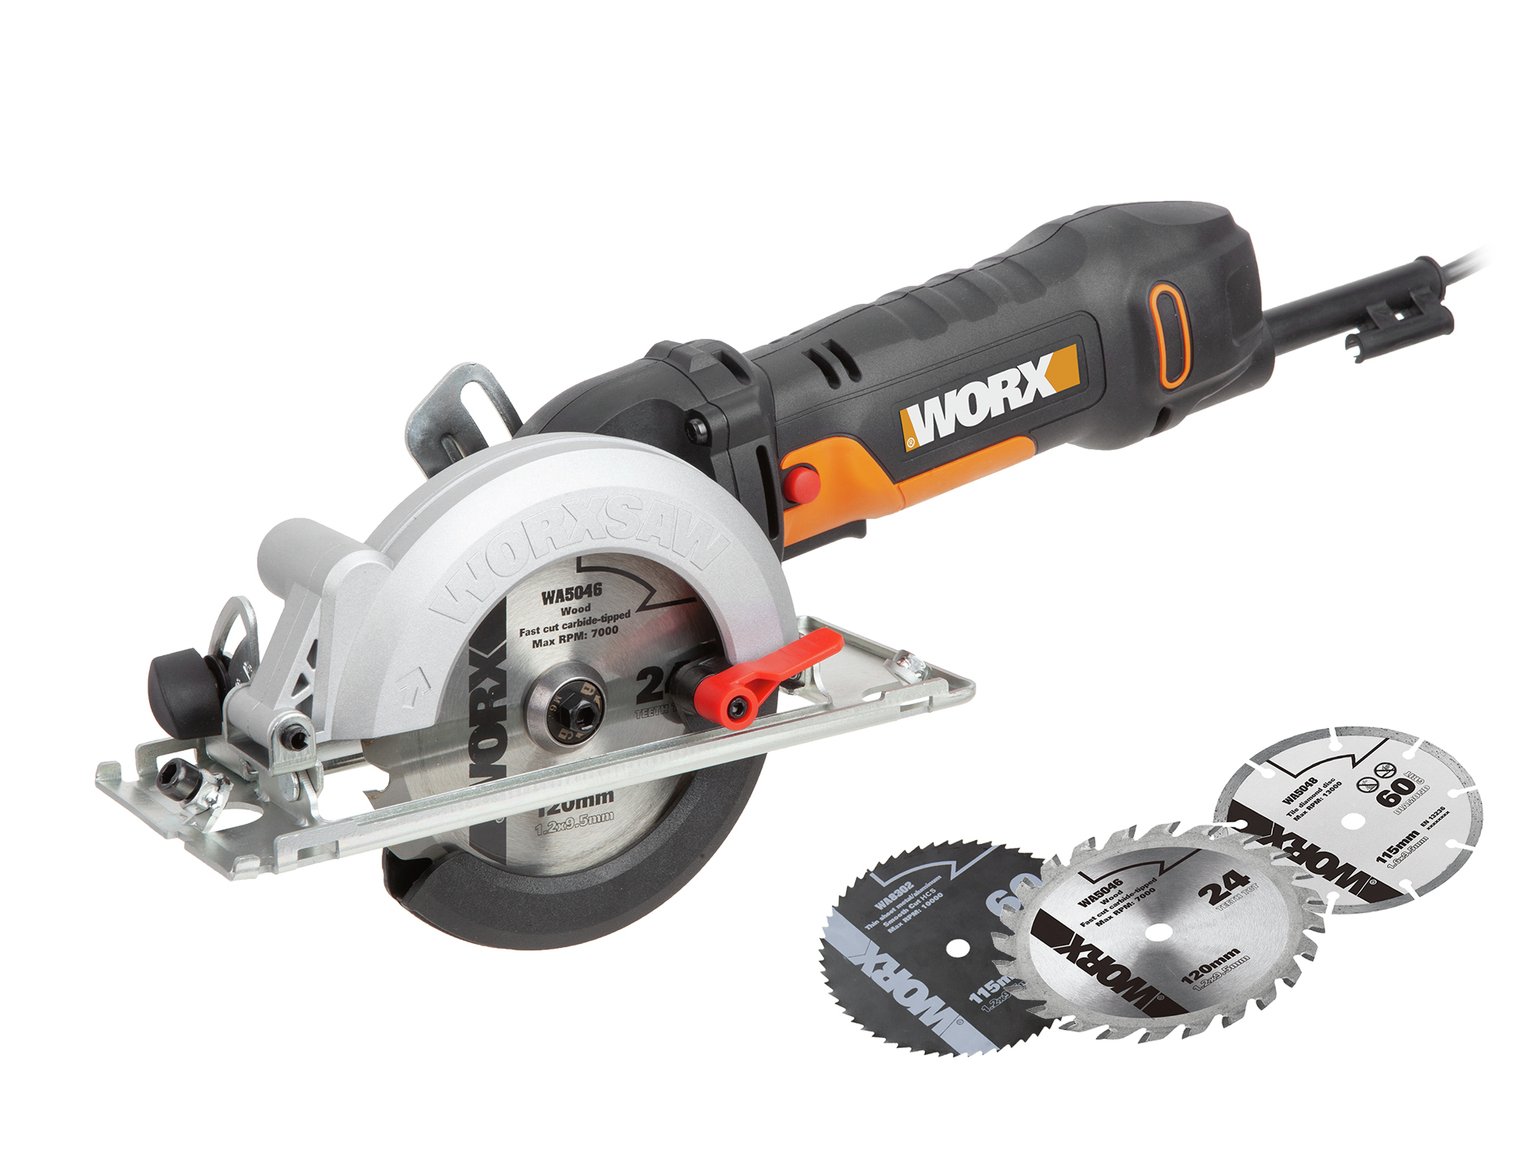 WORX WX439 XL Hand Saw Review